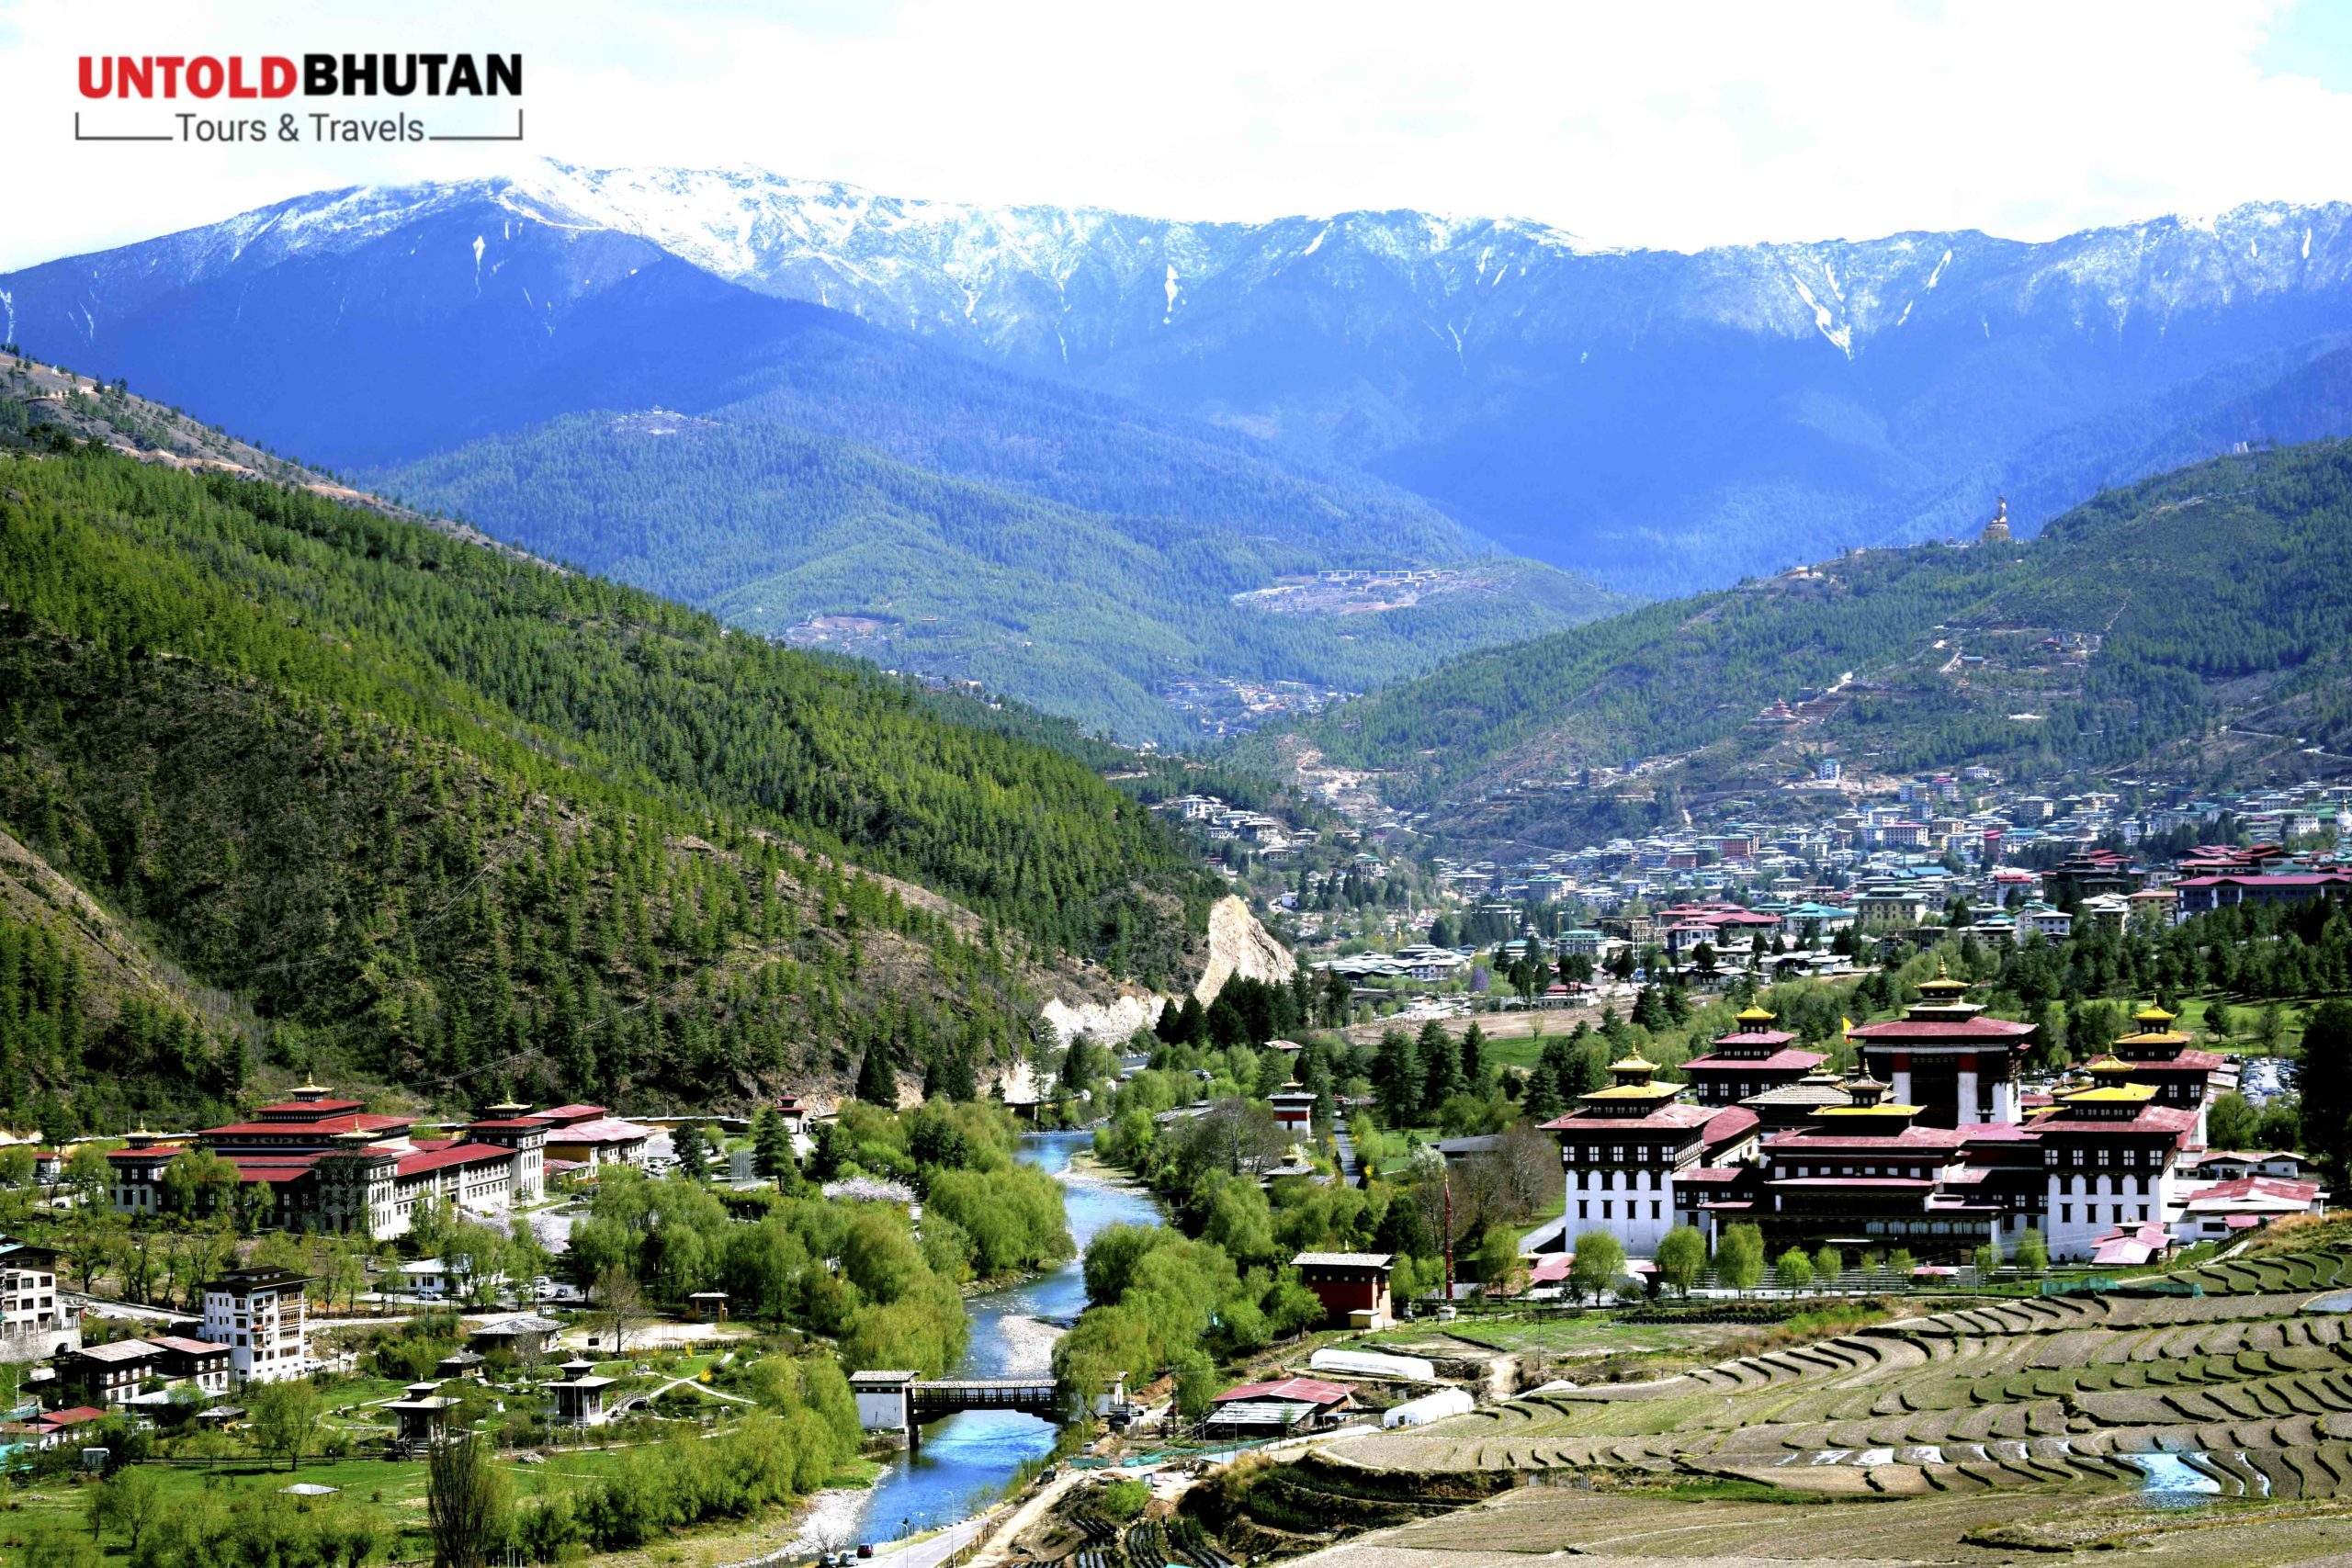 the valley of Thimphu as seen from top of the mountain.